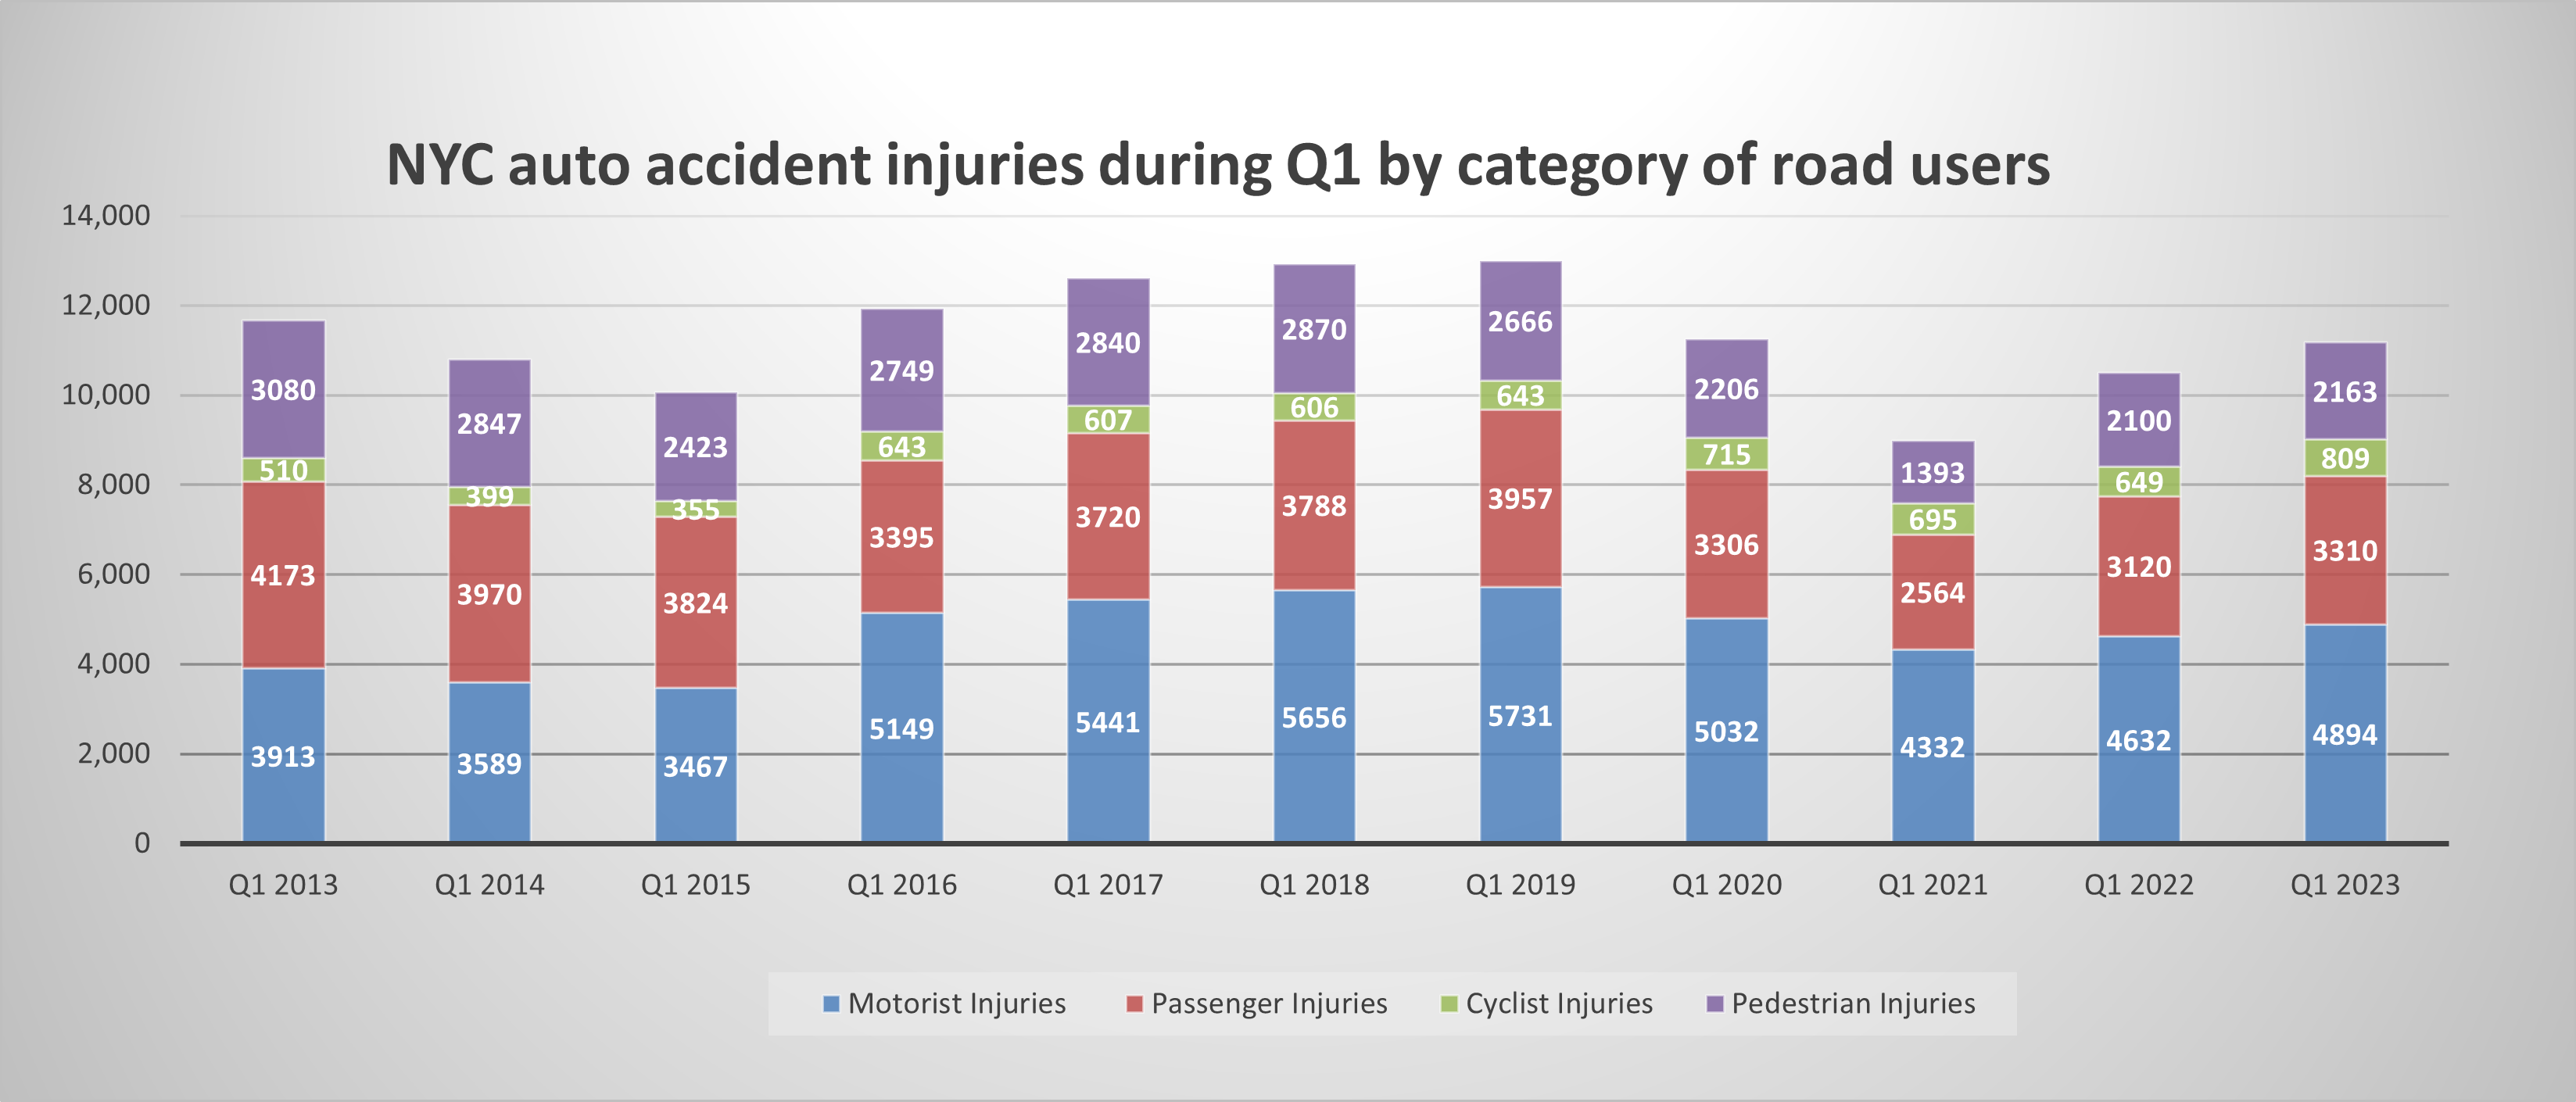 NYC auto accident injuries by category Q1 2023